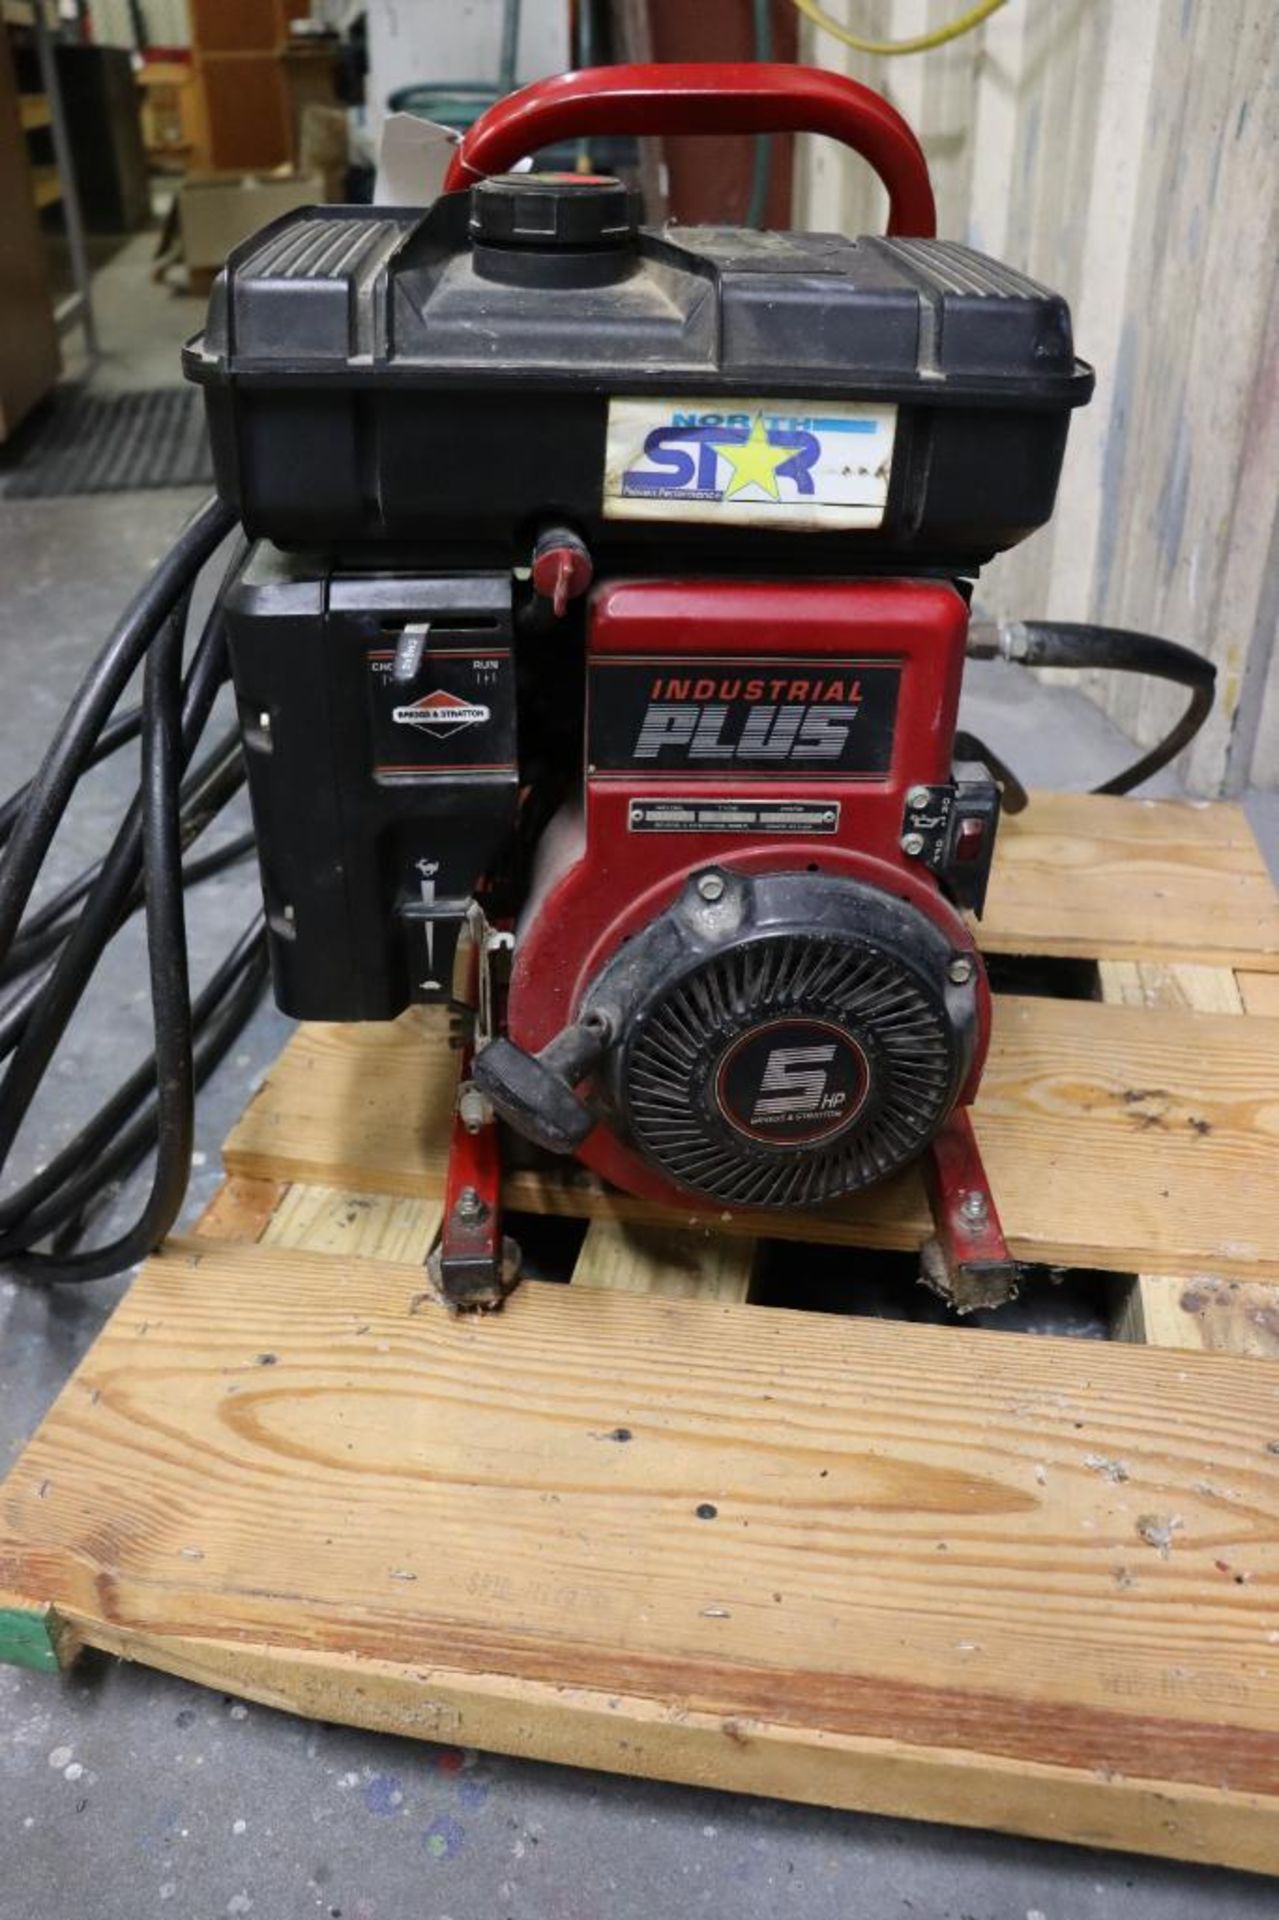 North Star gas pressure washer - Image 6 of 7